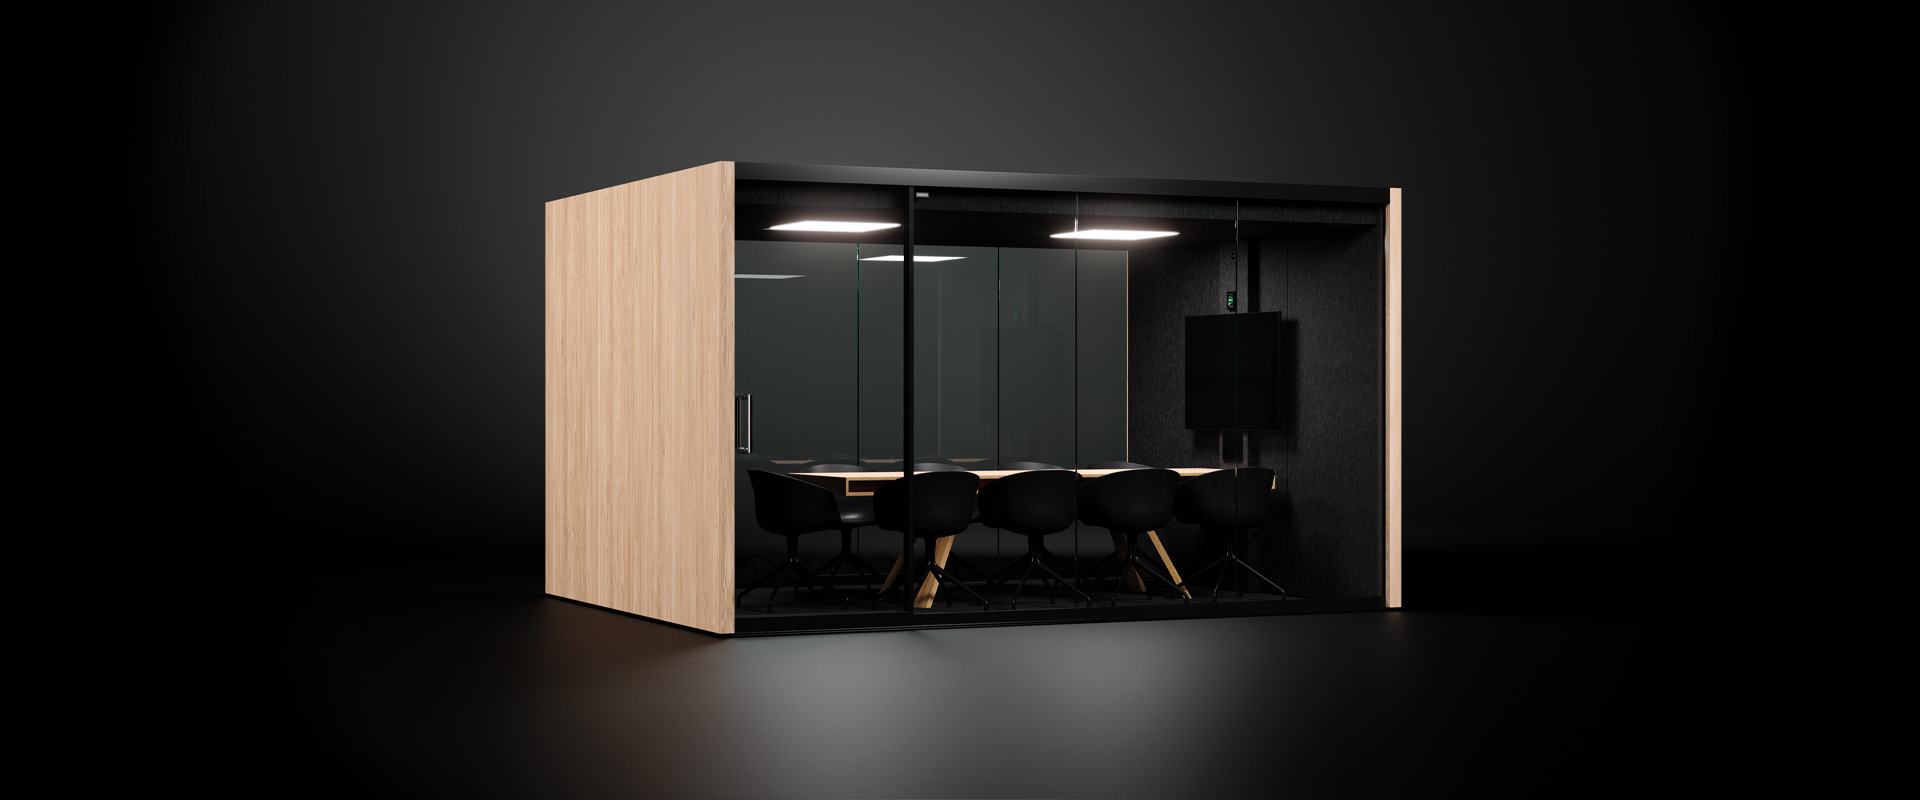 VETROSPACE XXL soundproof meeting pod room in black background